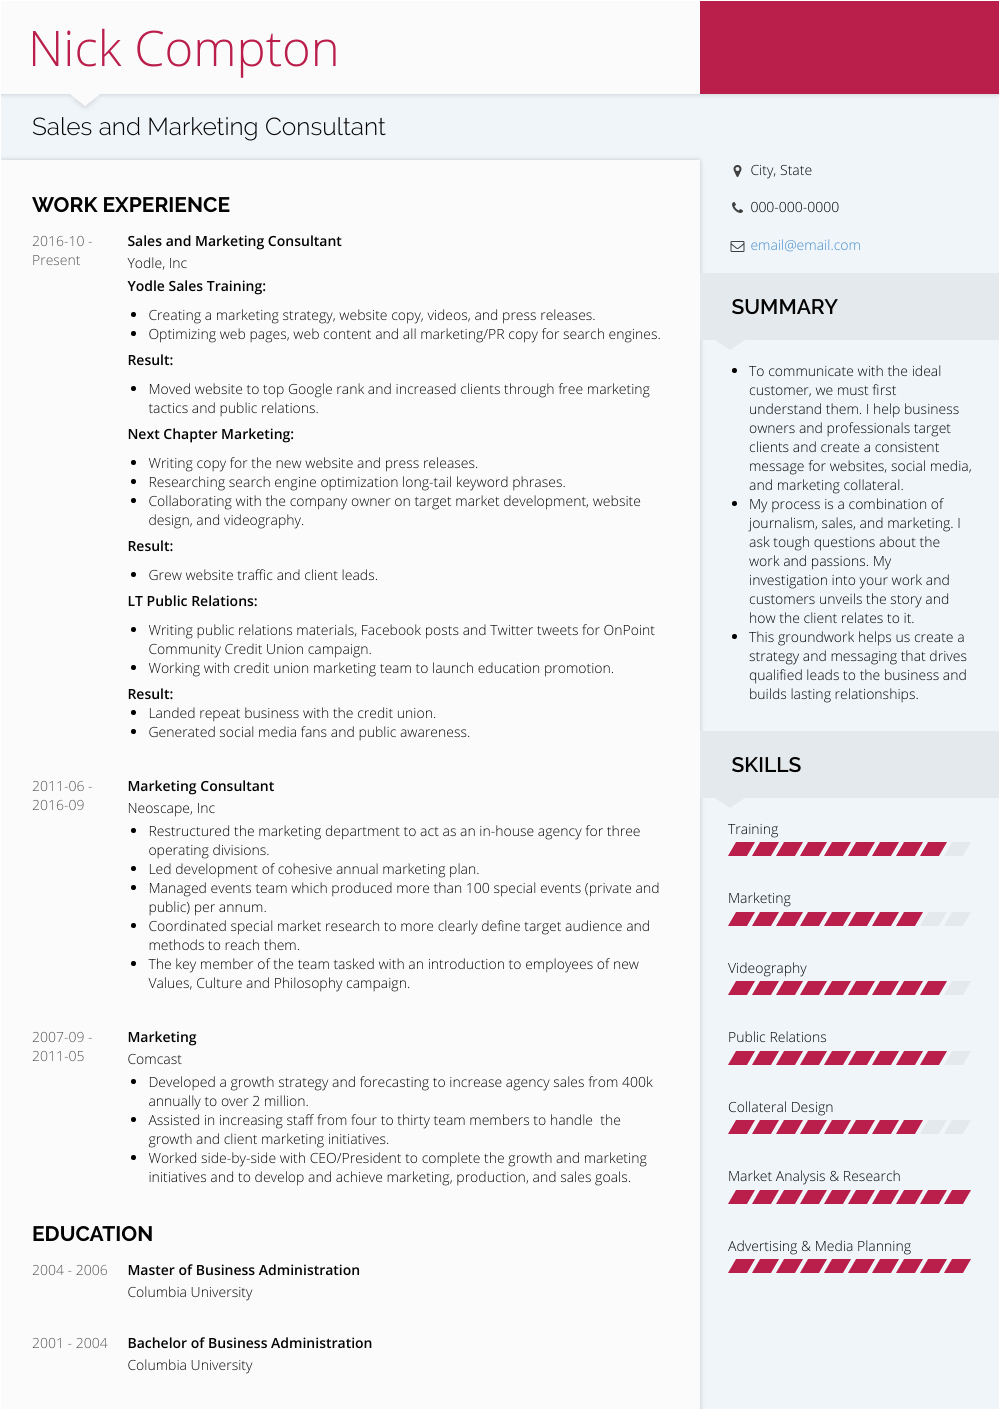 Sample Resume for Sales and Marketing Job Sales & Marketing Executive Resume Samples and Templates